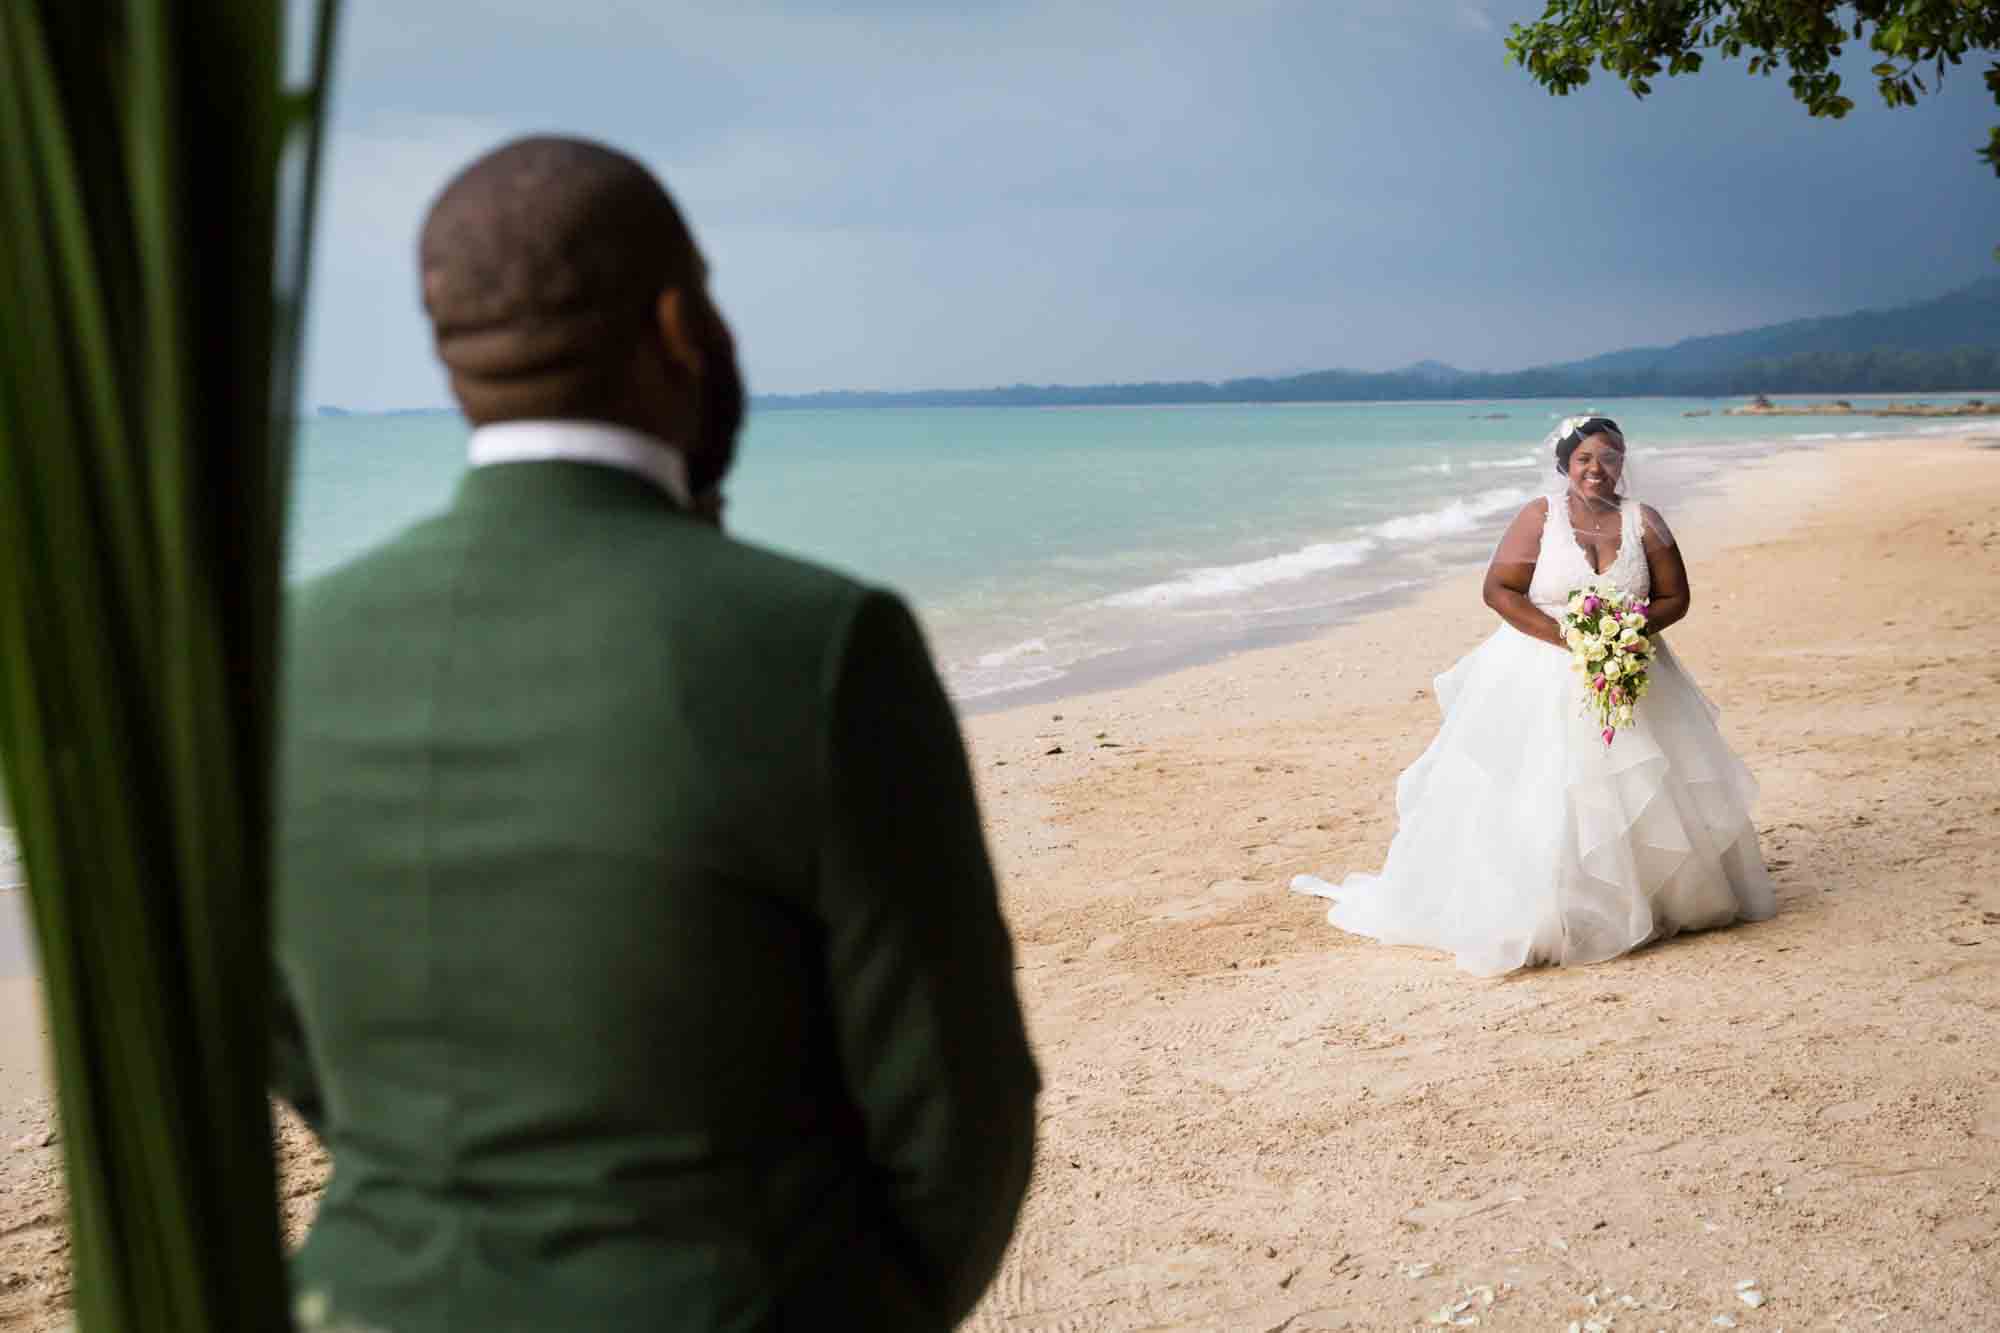 Groom seeing bride for first time for an article on destination wedding photography tips